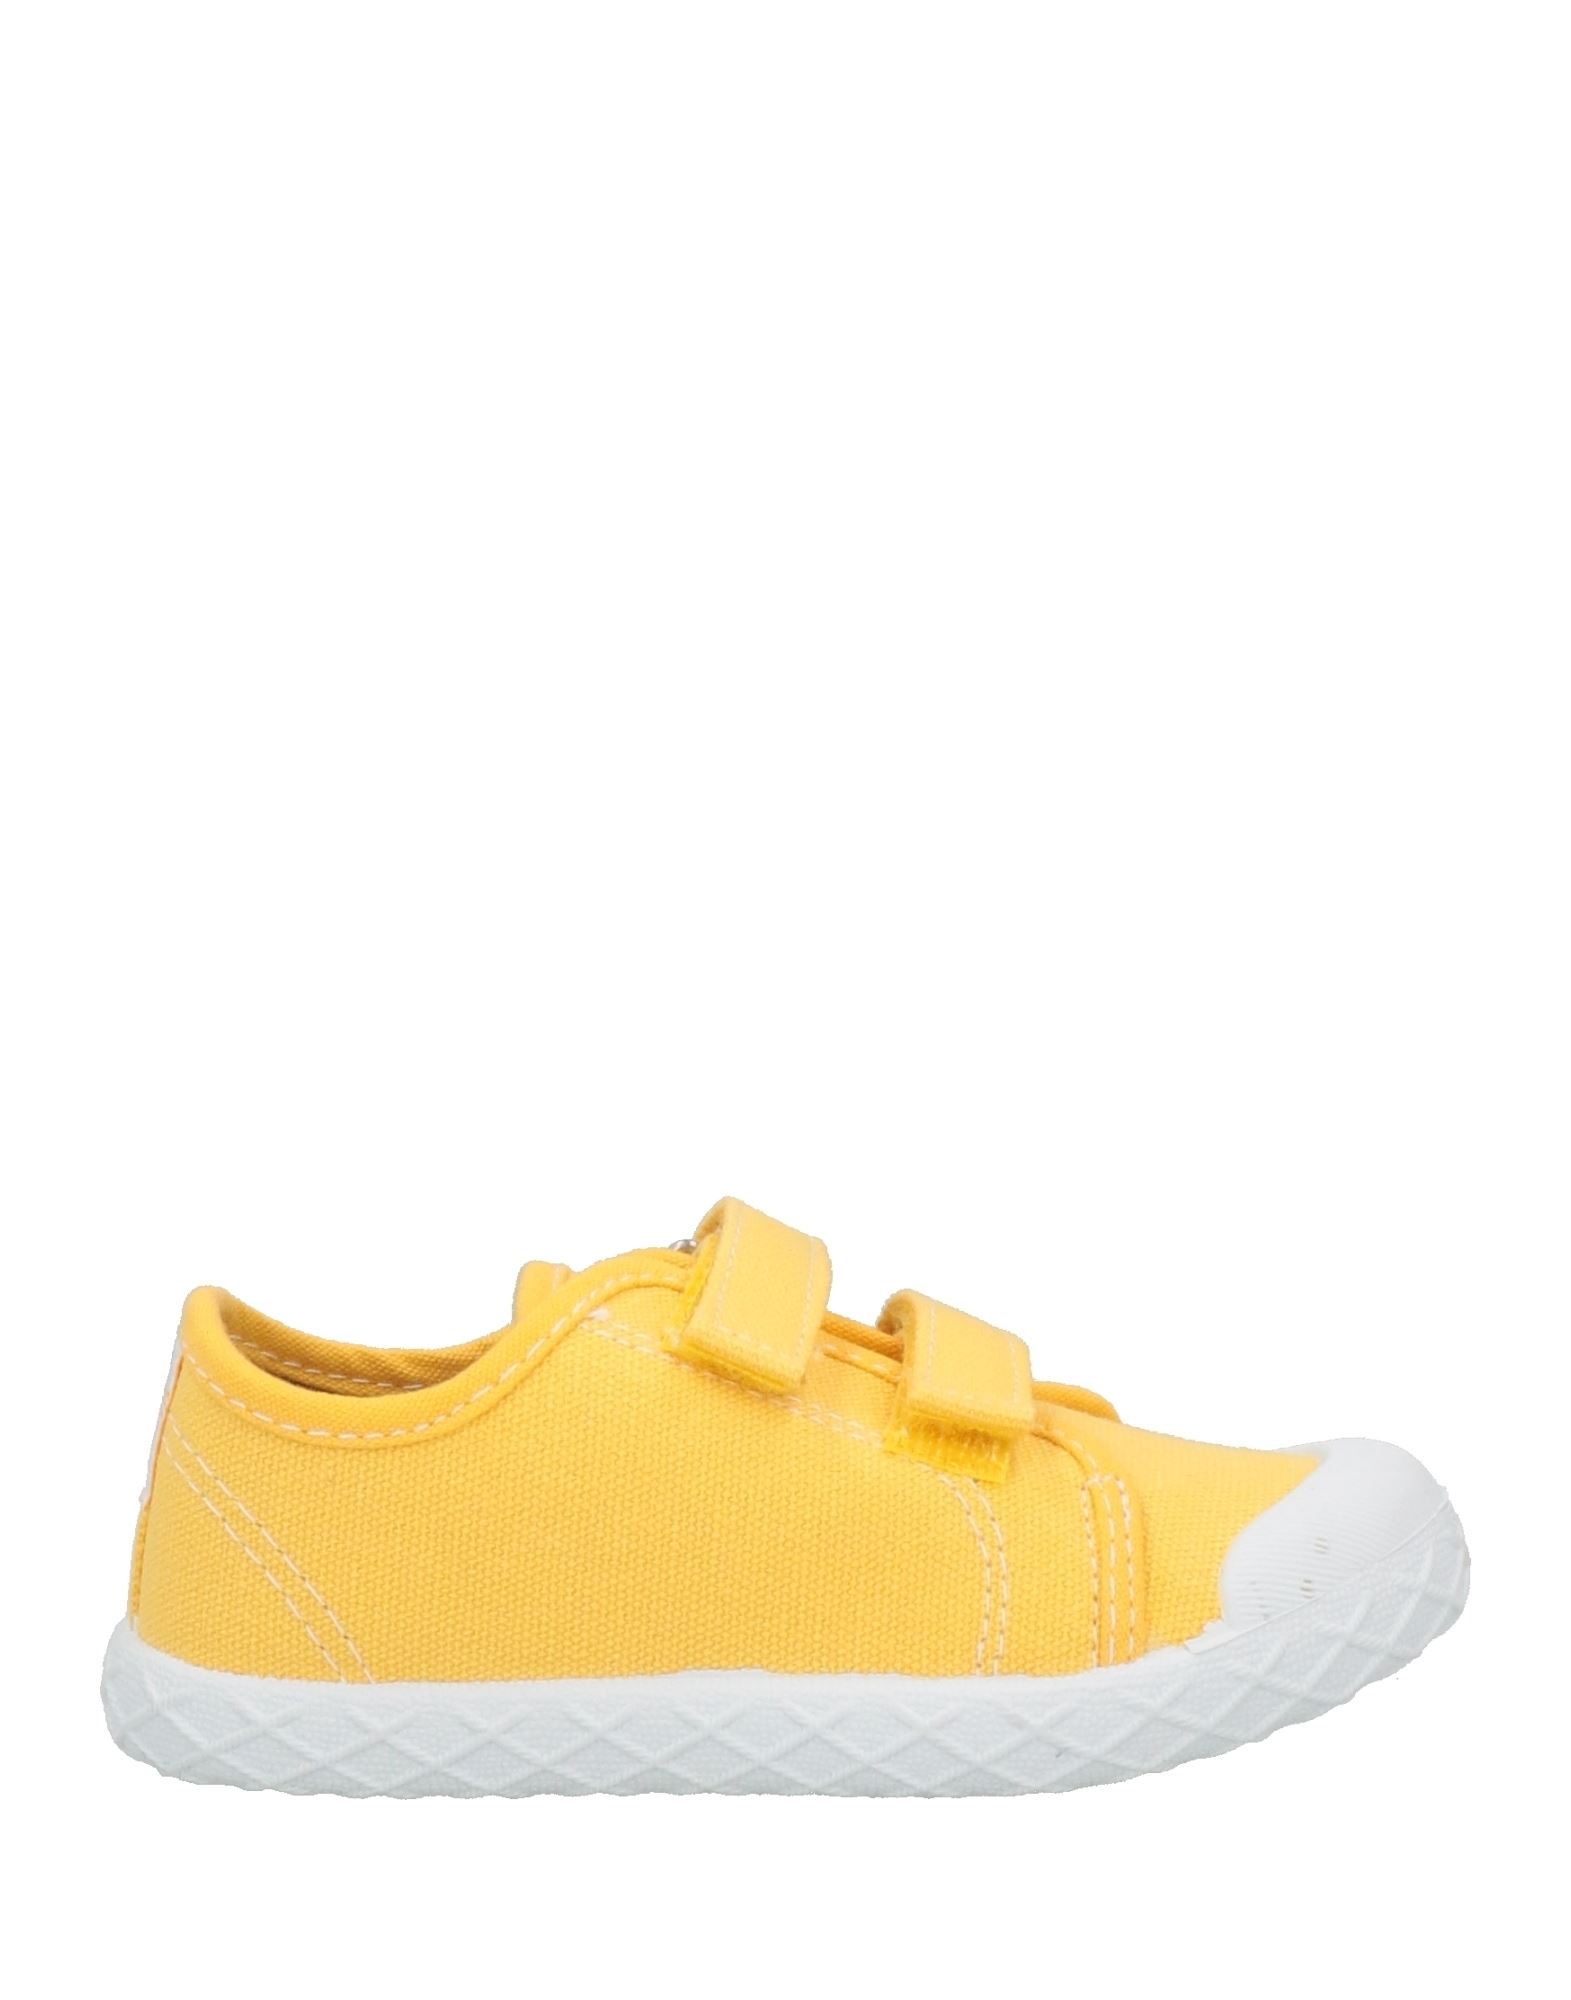 CHICCO Sneakers Kinder Gelb von CHICCO